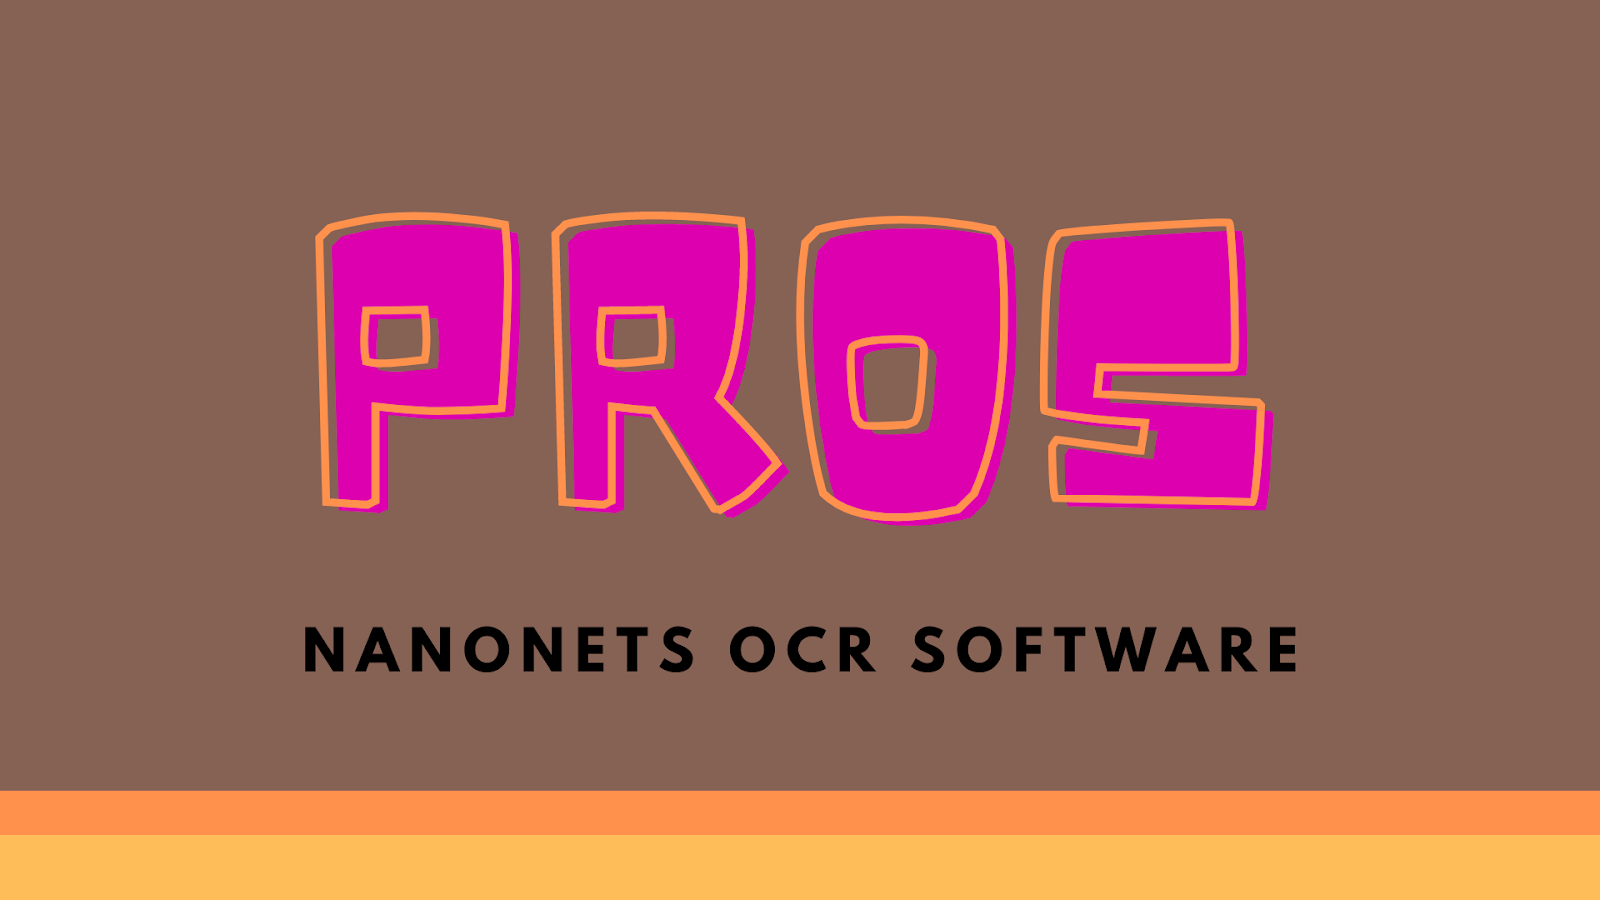 Pros Of Nanonets OCR Software